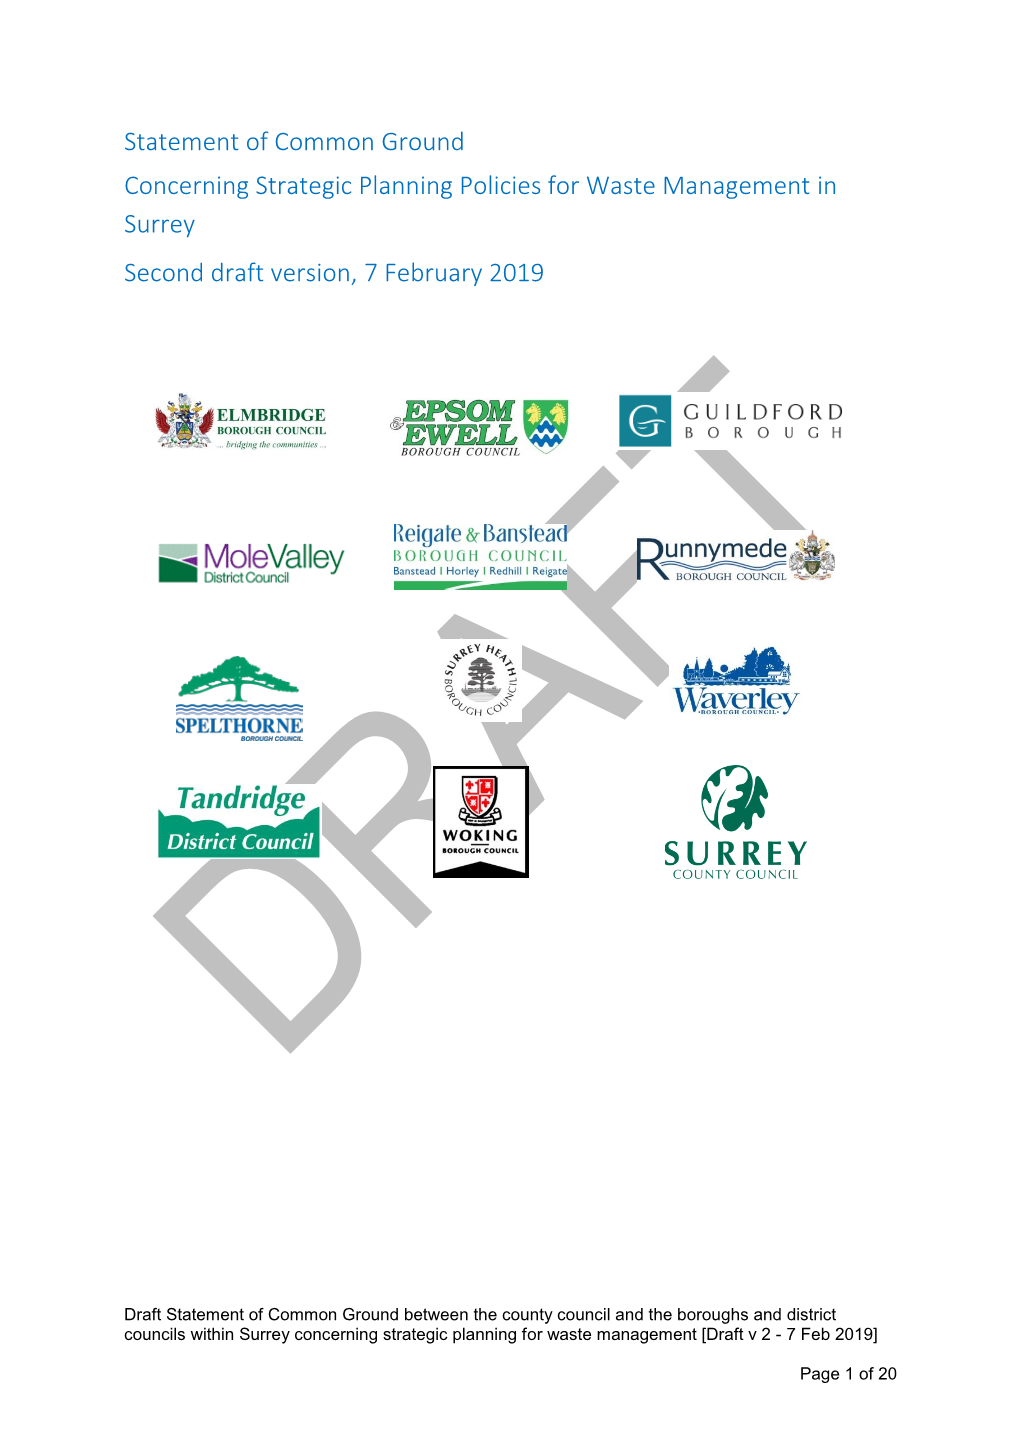 Statement of Common Ground Concerning Strategic Planning Policies for Waste Management in Surrey